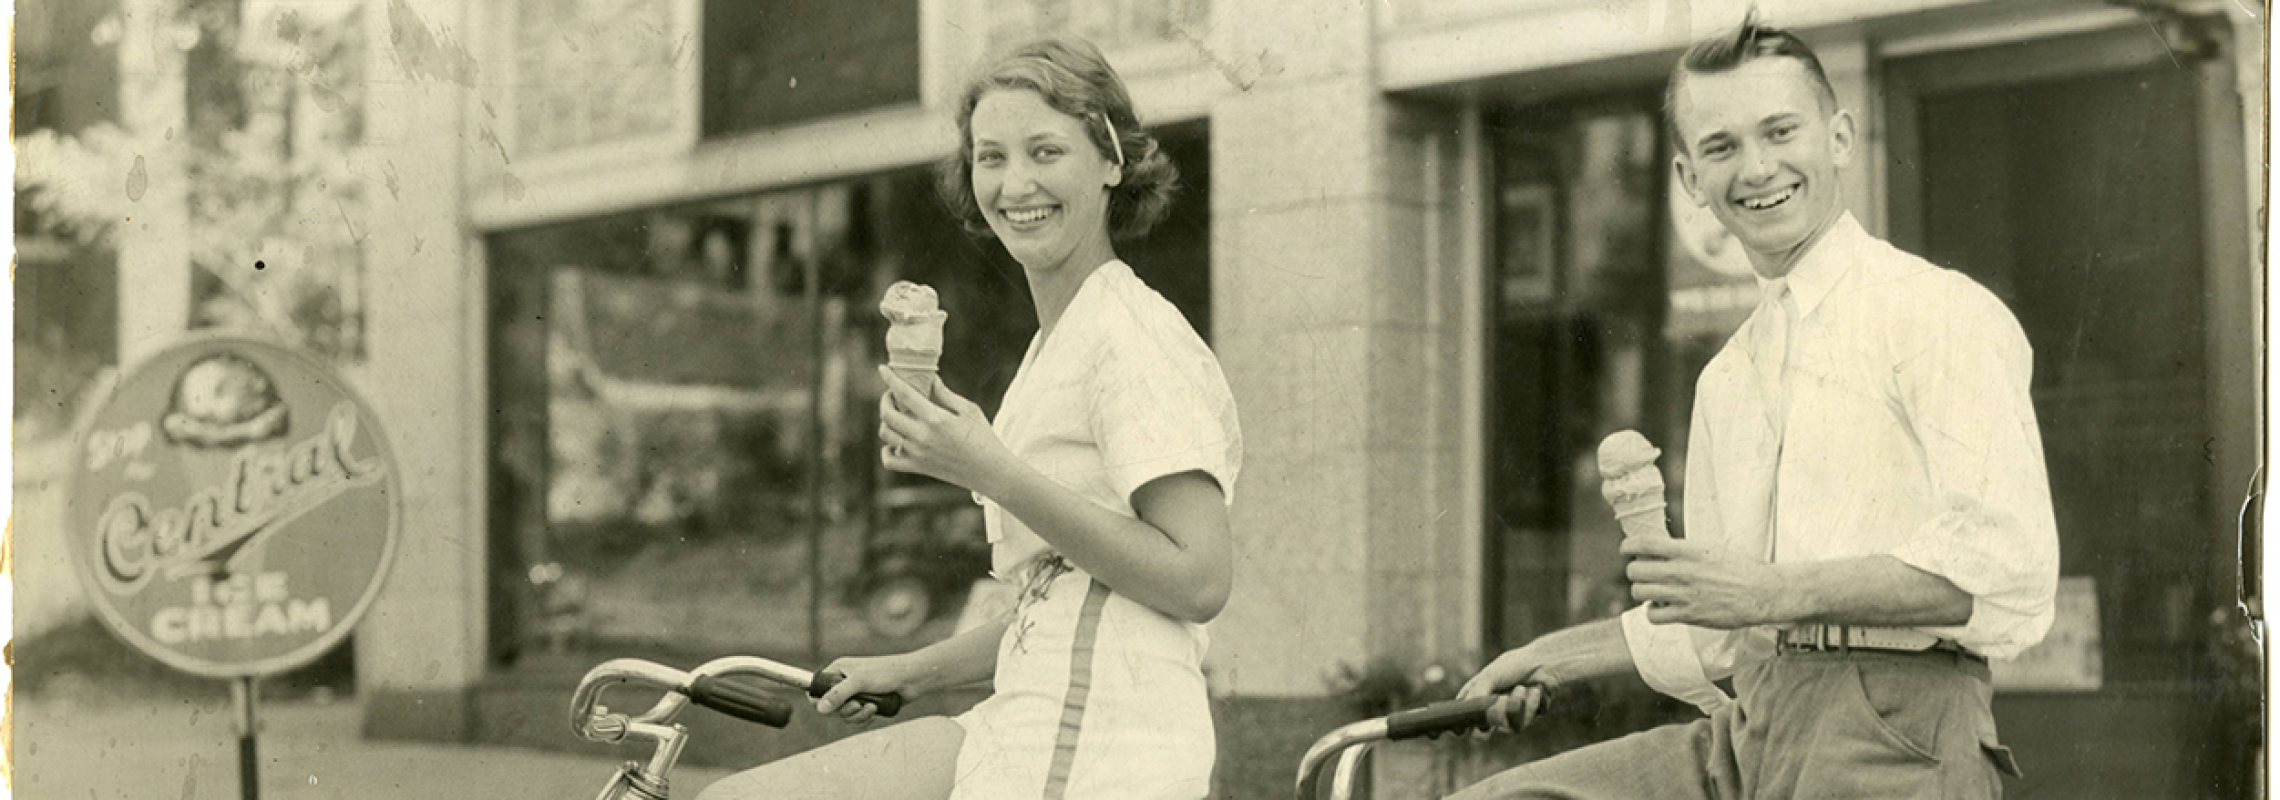 A woman and a man on a tandem bicycle holding Central Dairy ice cream cones and smiling at camera